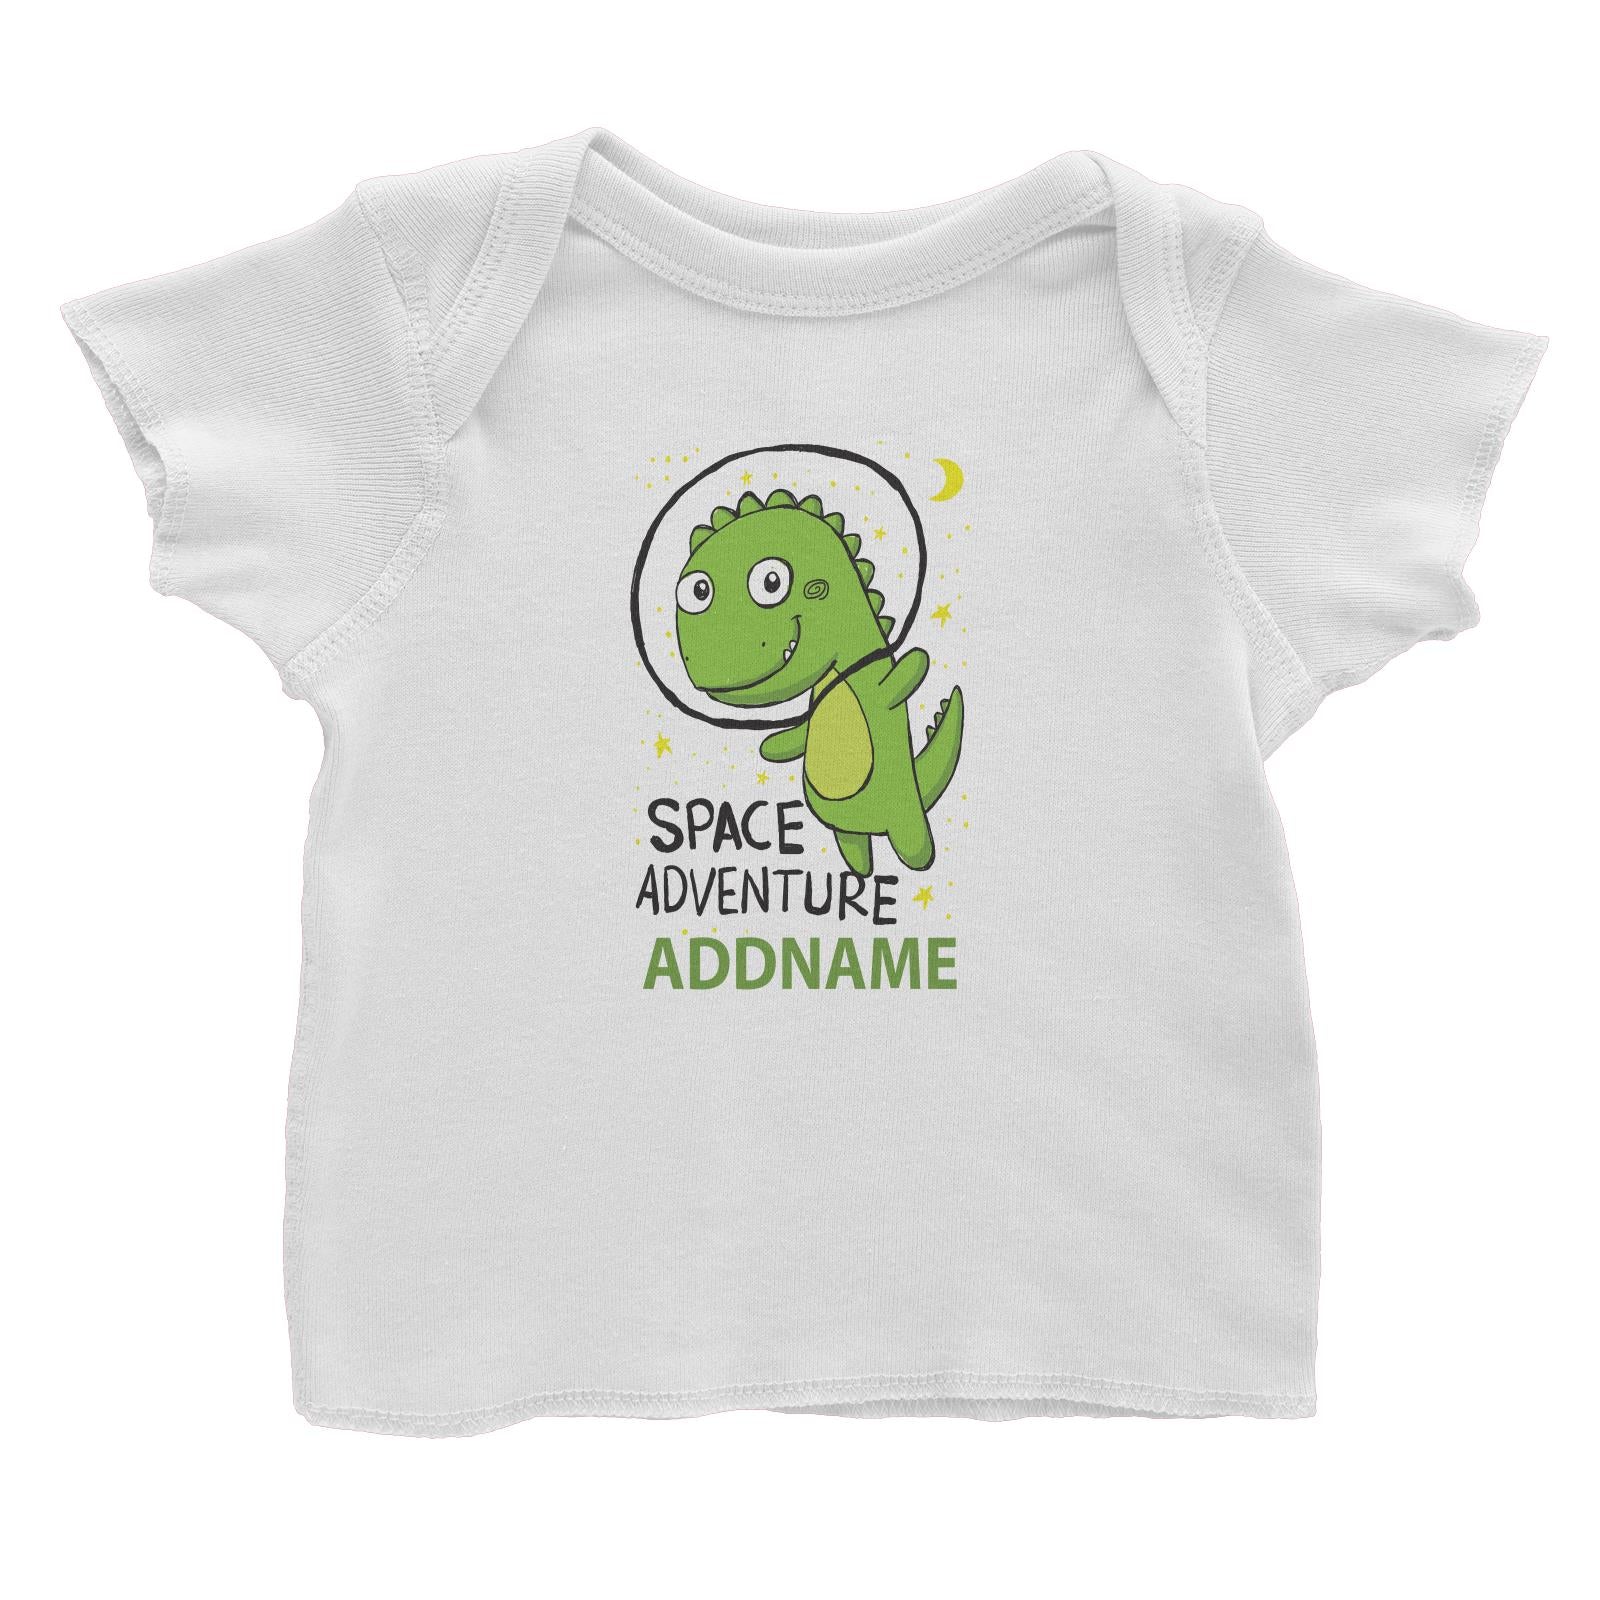 Cool Cute Dinosaur Space Adventure Addname Baby T-Shirt